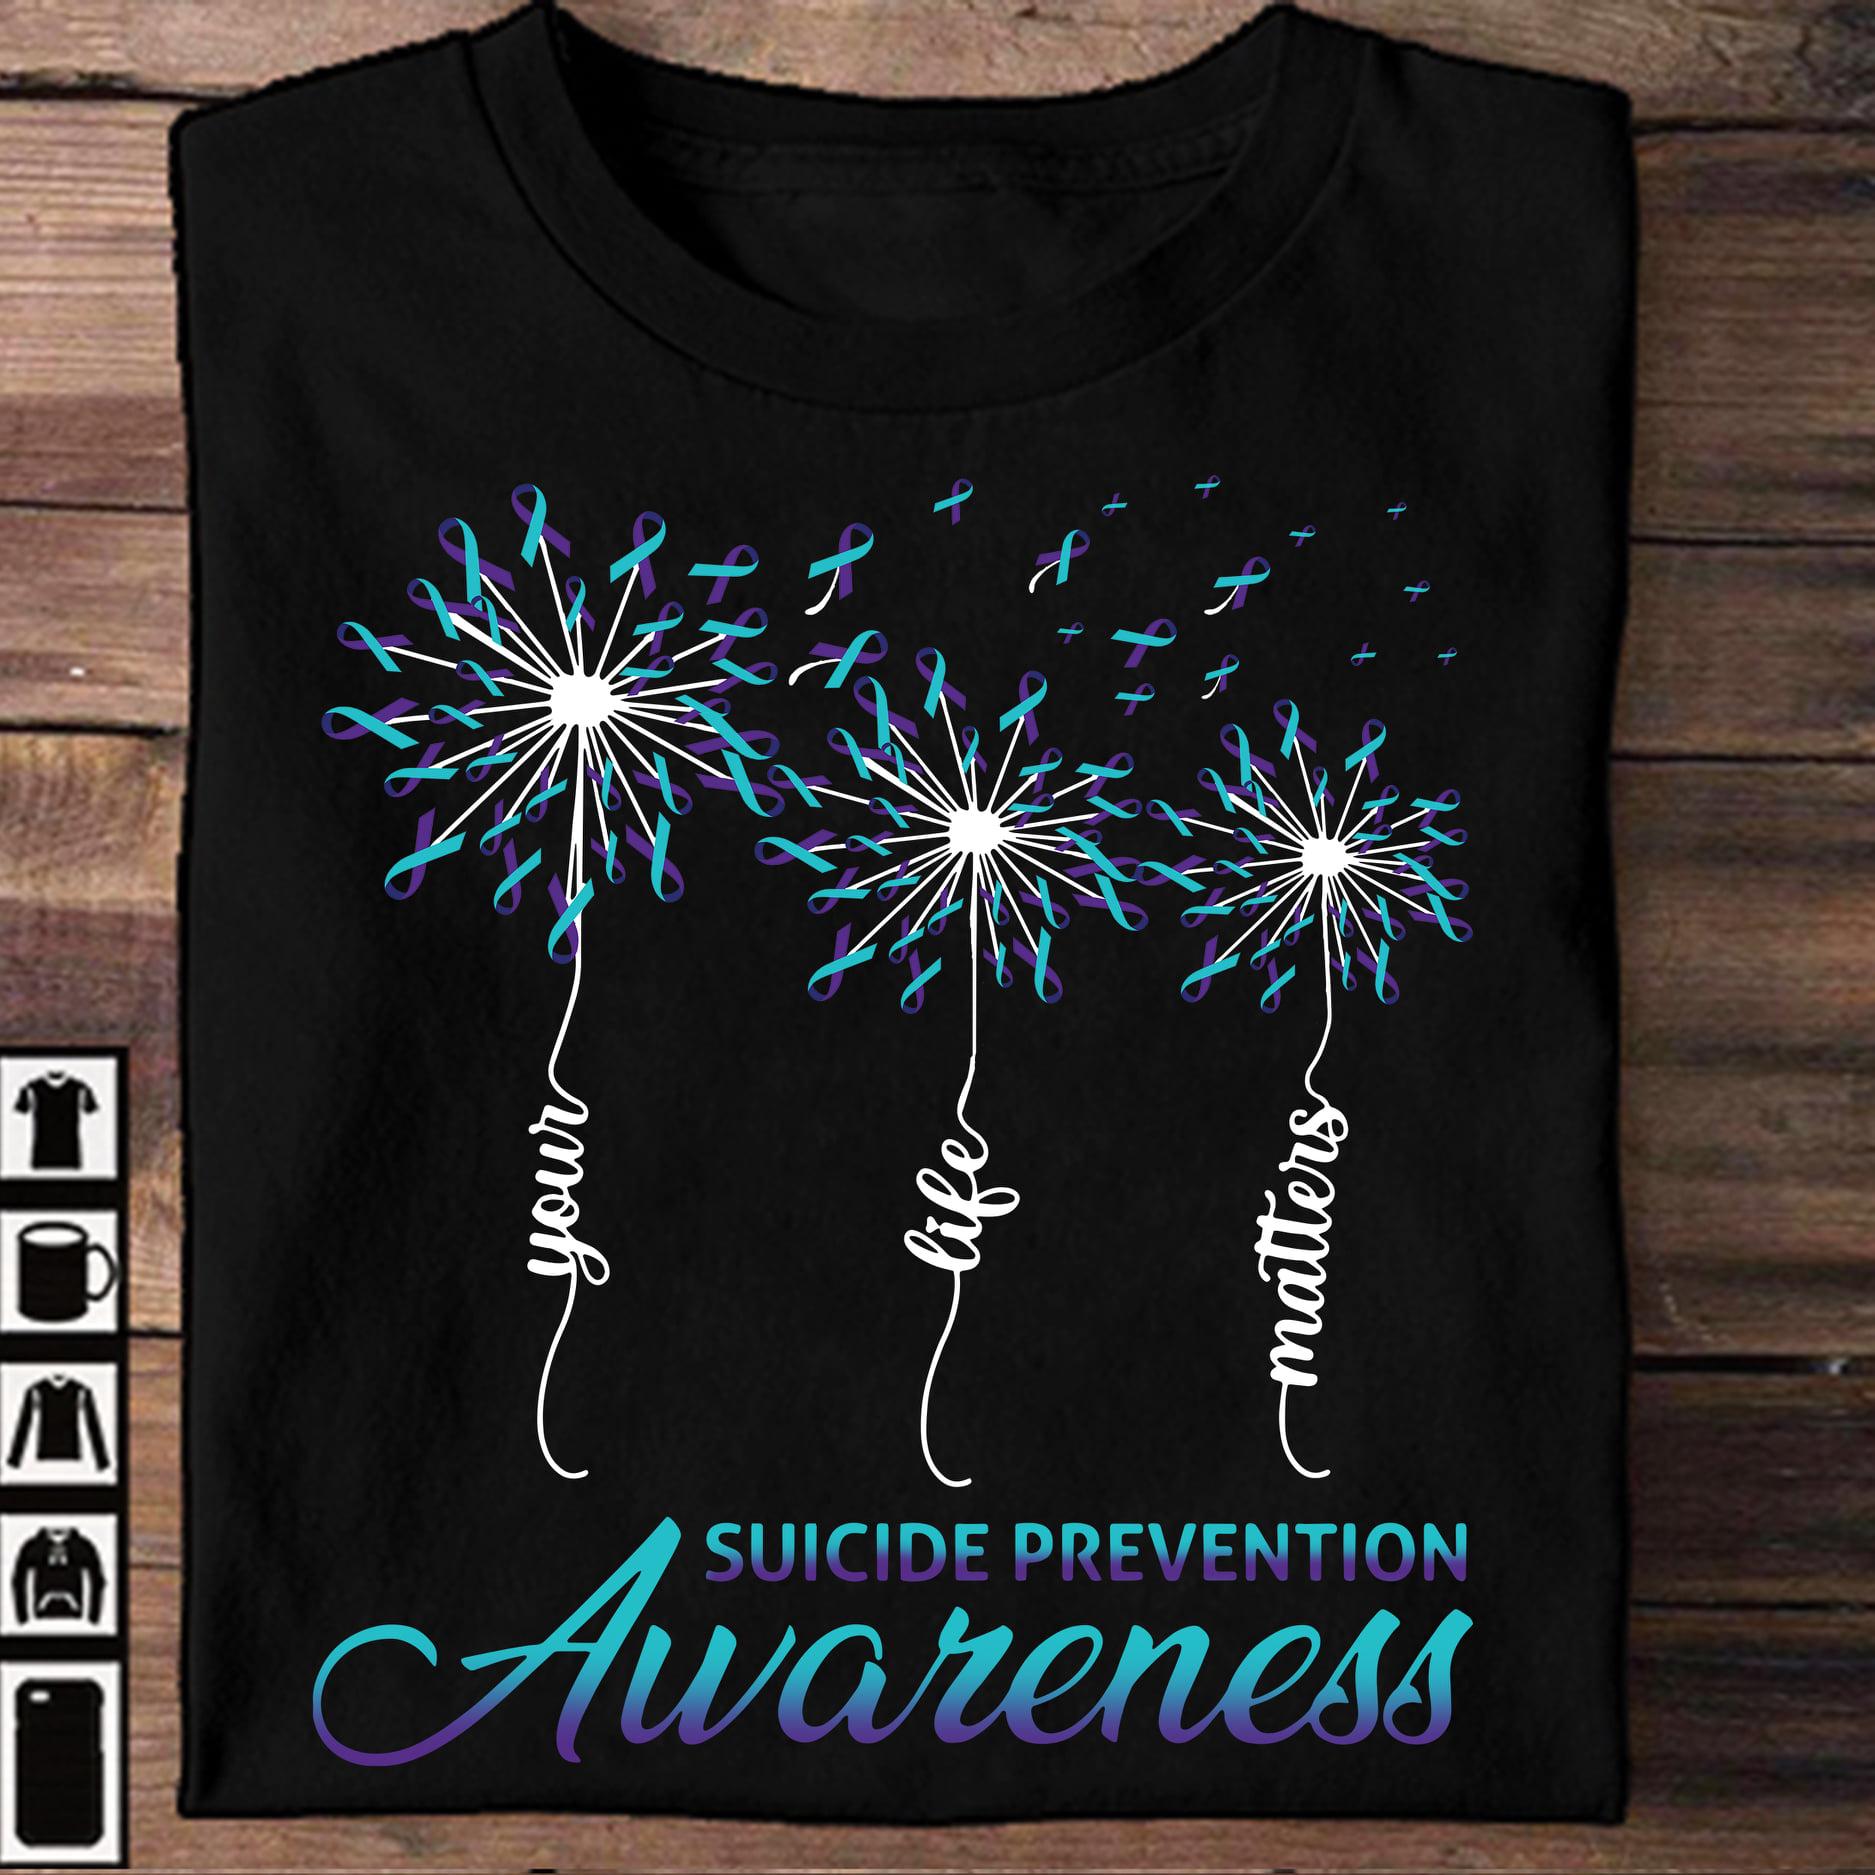 Suicide prevention awareness - Your life matters, fireworks ribbon graphic